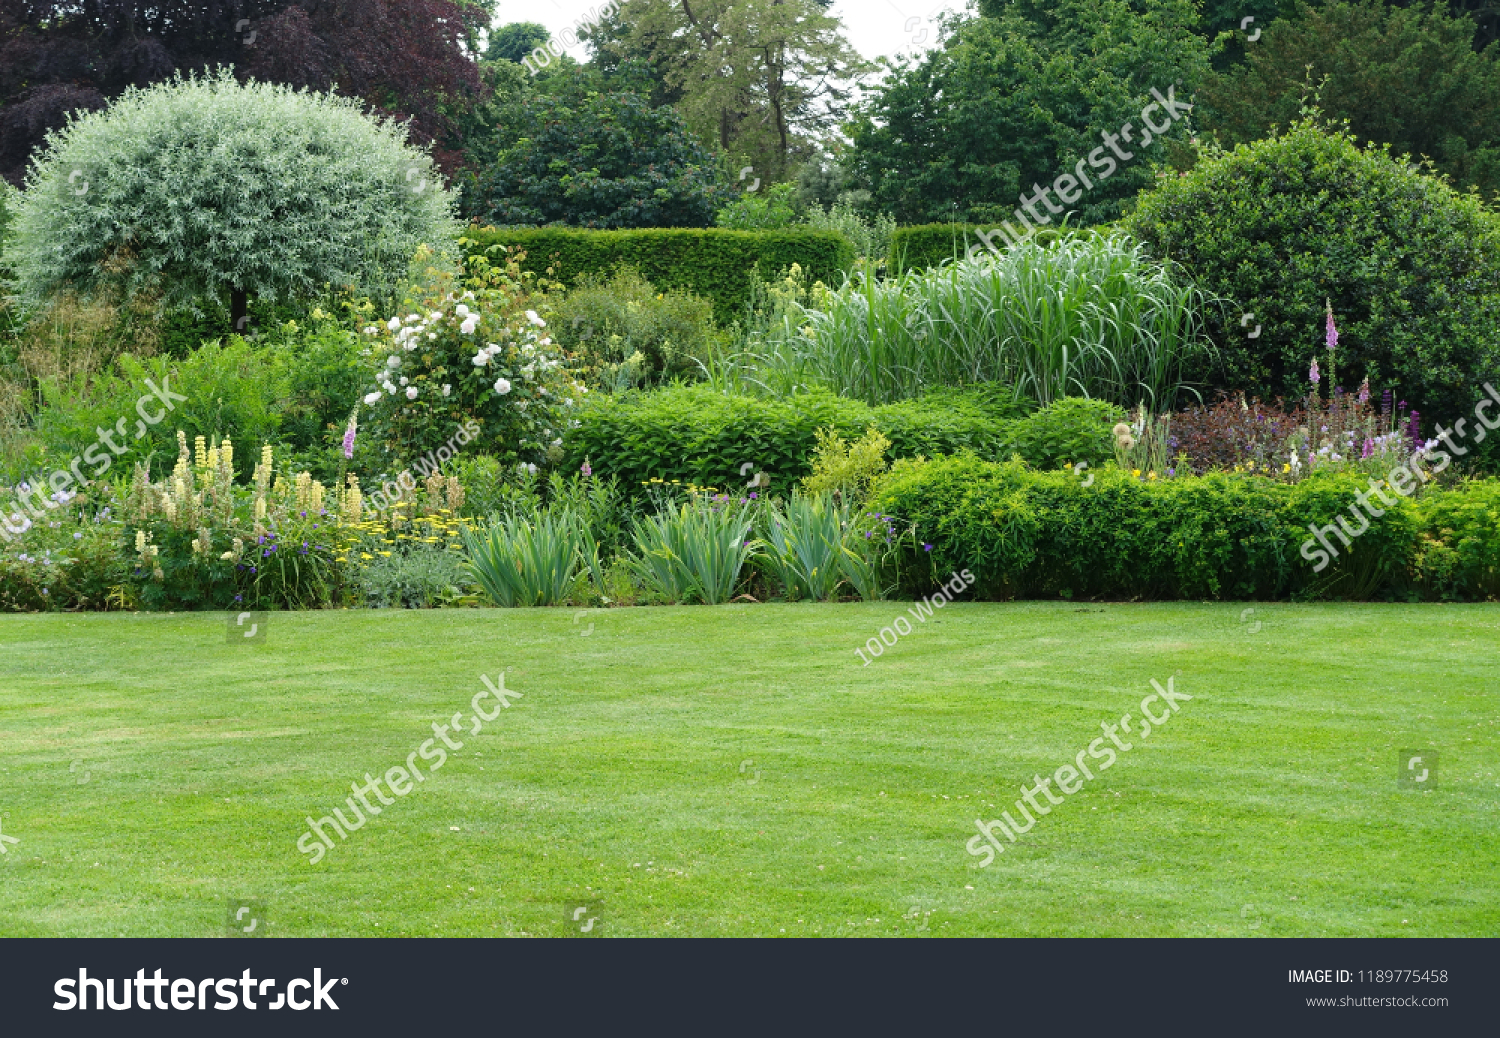 Scenic View of a Beautiful English Style Landscape Garden with a Green Mowed Lawn and Colourful Flower Bed #1189775458